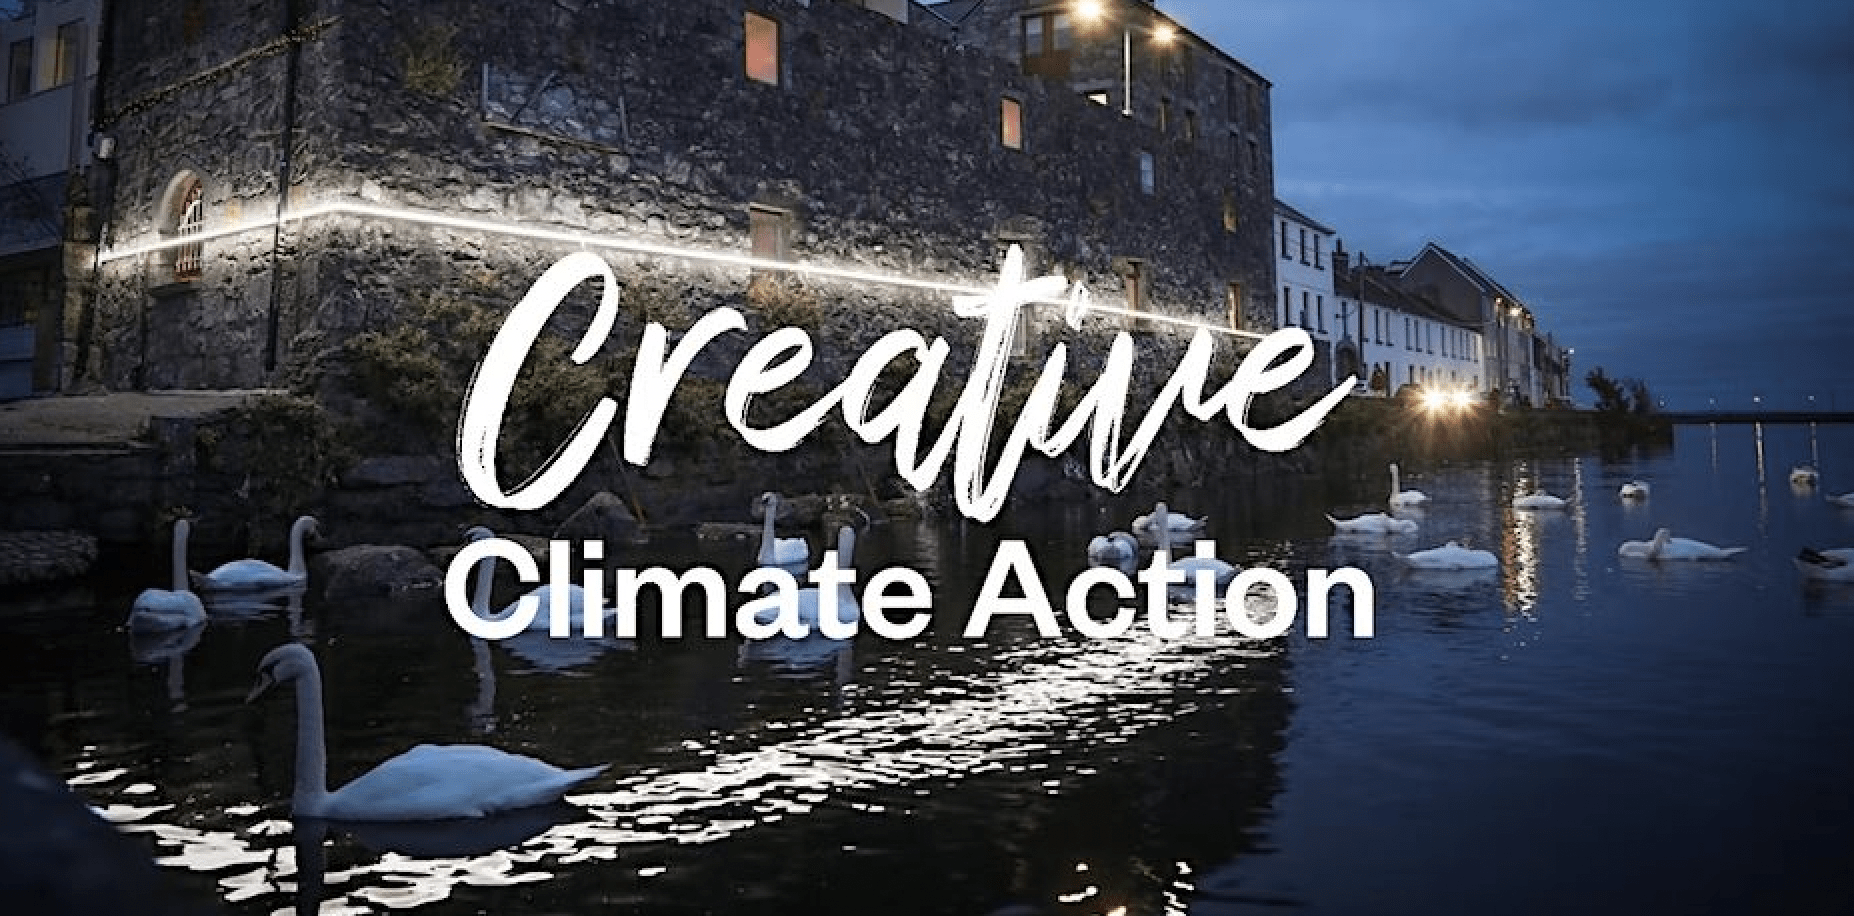 Creative Futures Academy included in Creative Climate Action funding